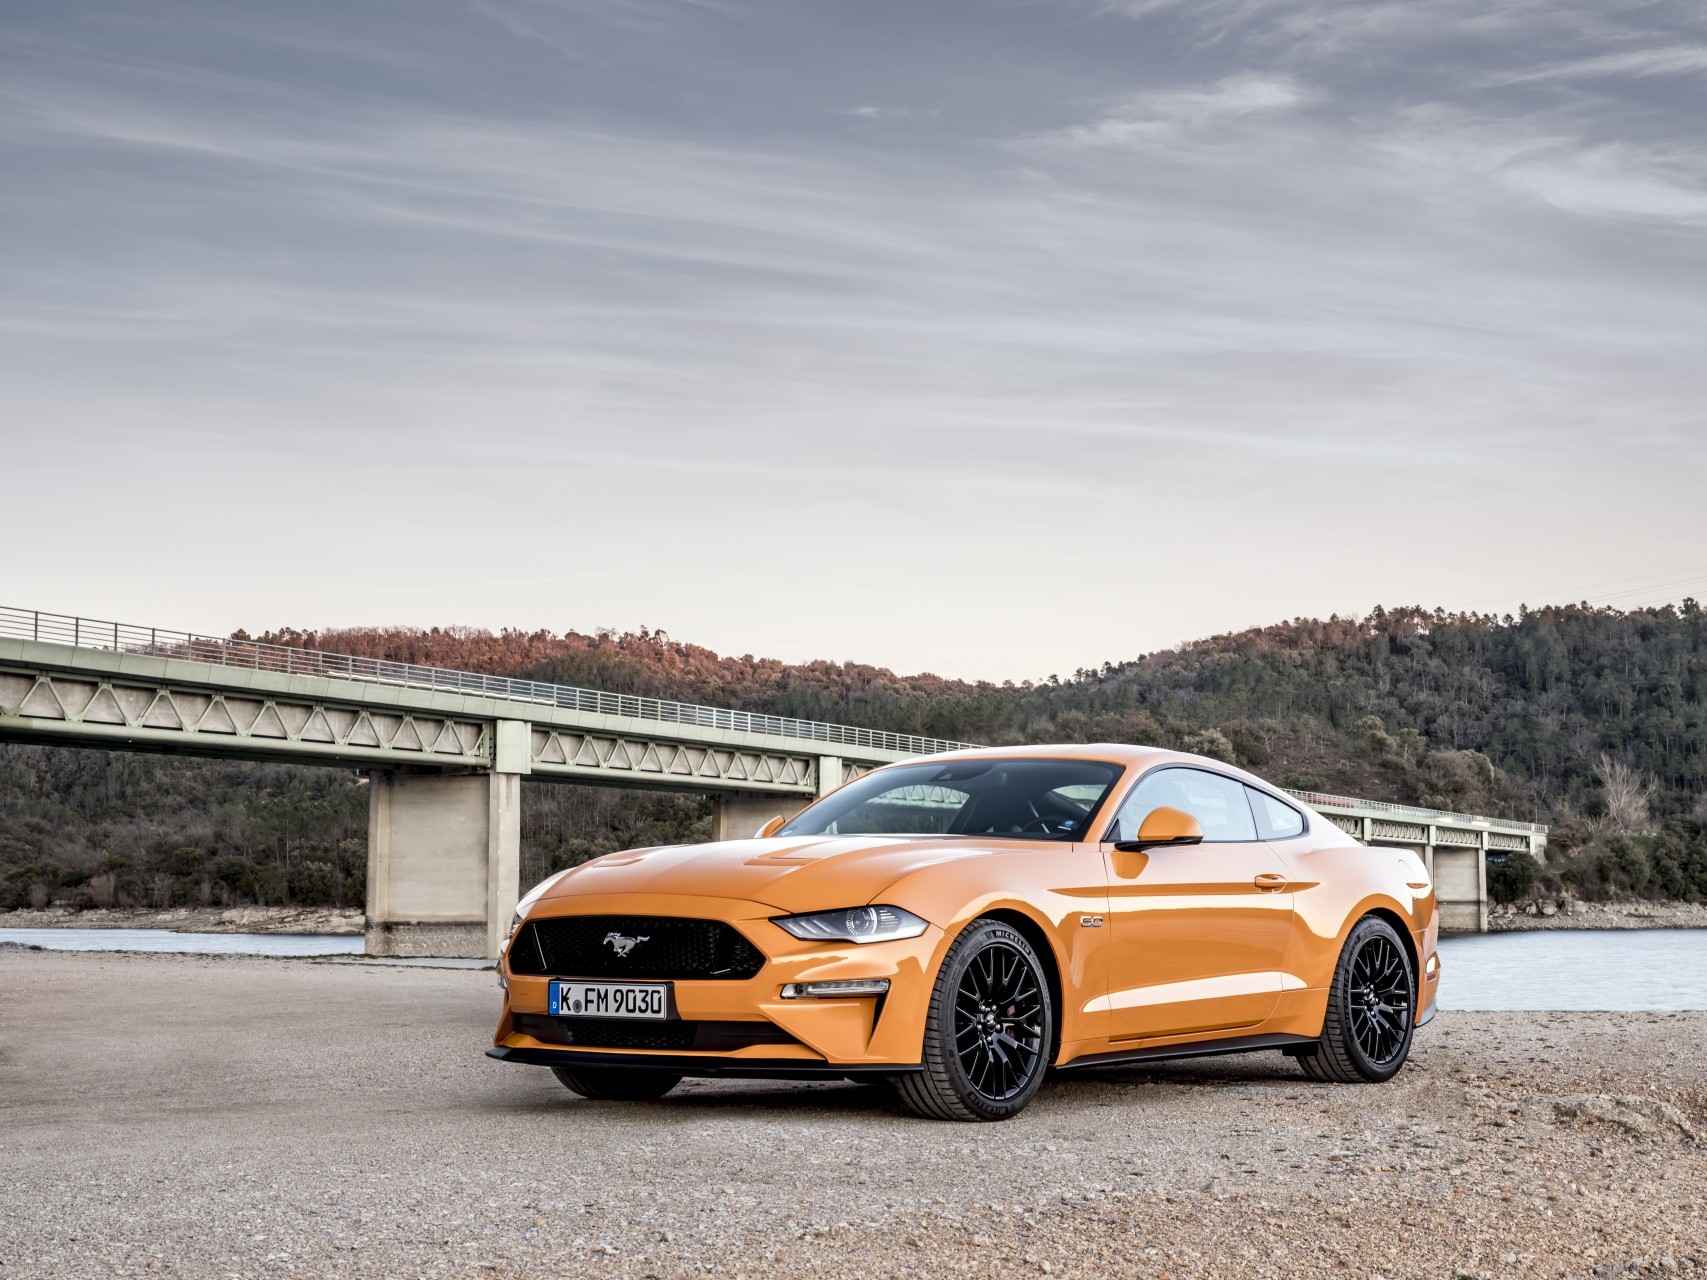 2023 Ford Mustang Awd Indirectly Suggested By Brand Manager Autoevolution